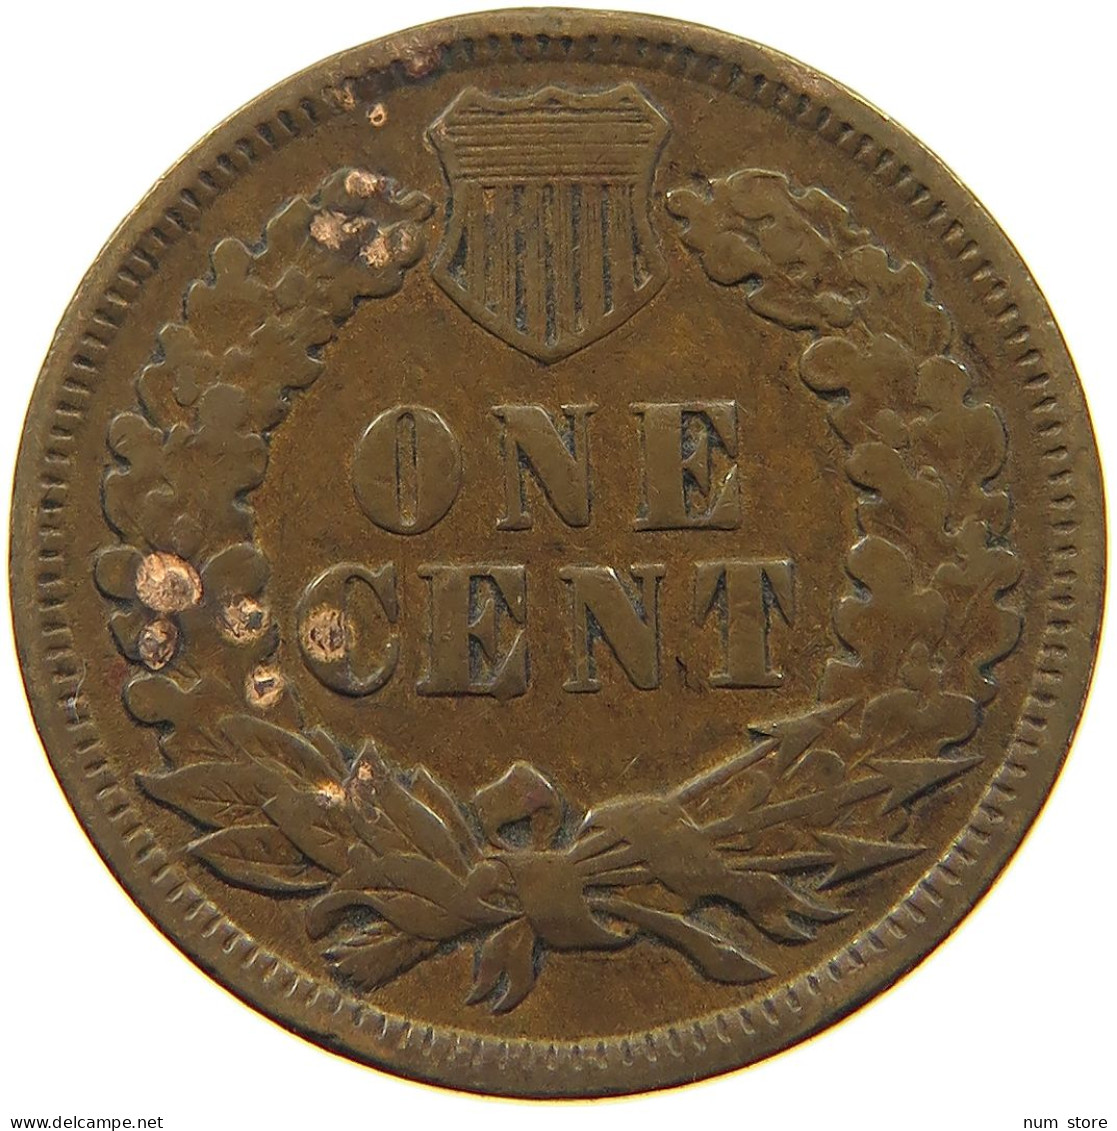 UNITED STATES OF AMERICA CENT 1890 INDIAN HEAD #a036 0691 - 1859-1909: Indian Head